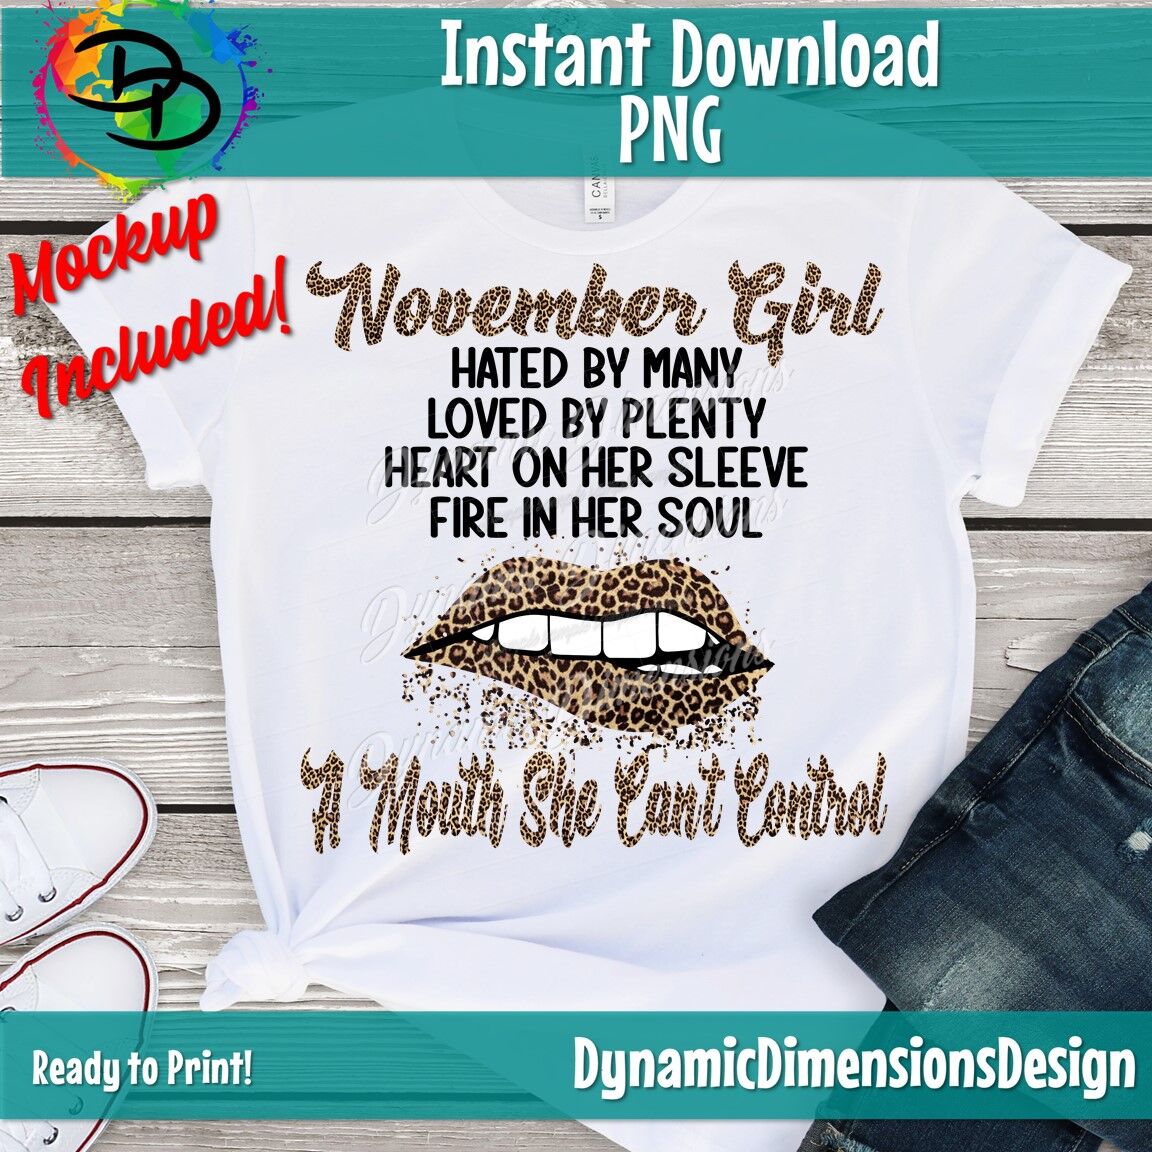 Birthday drip, lips, birthday girl shirt, PNG file - free svg file for  members - SVG Heart